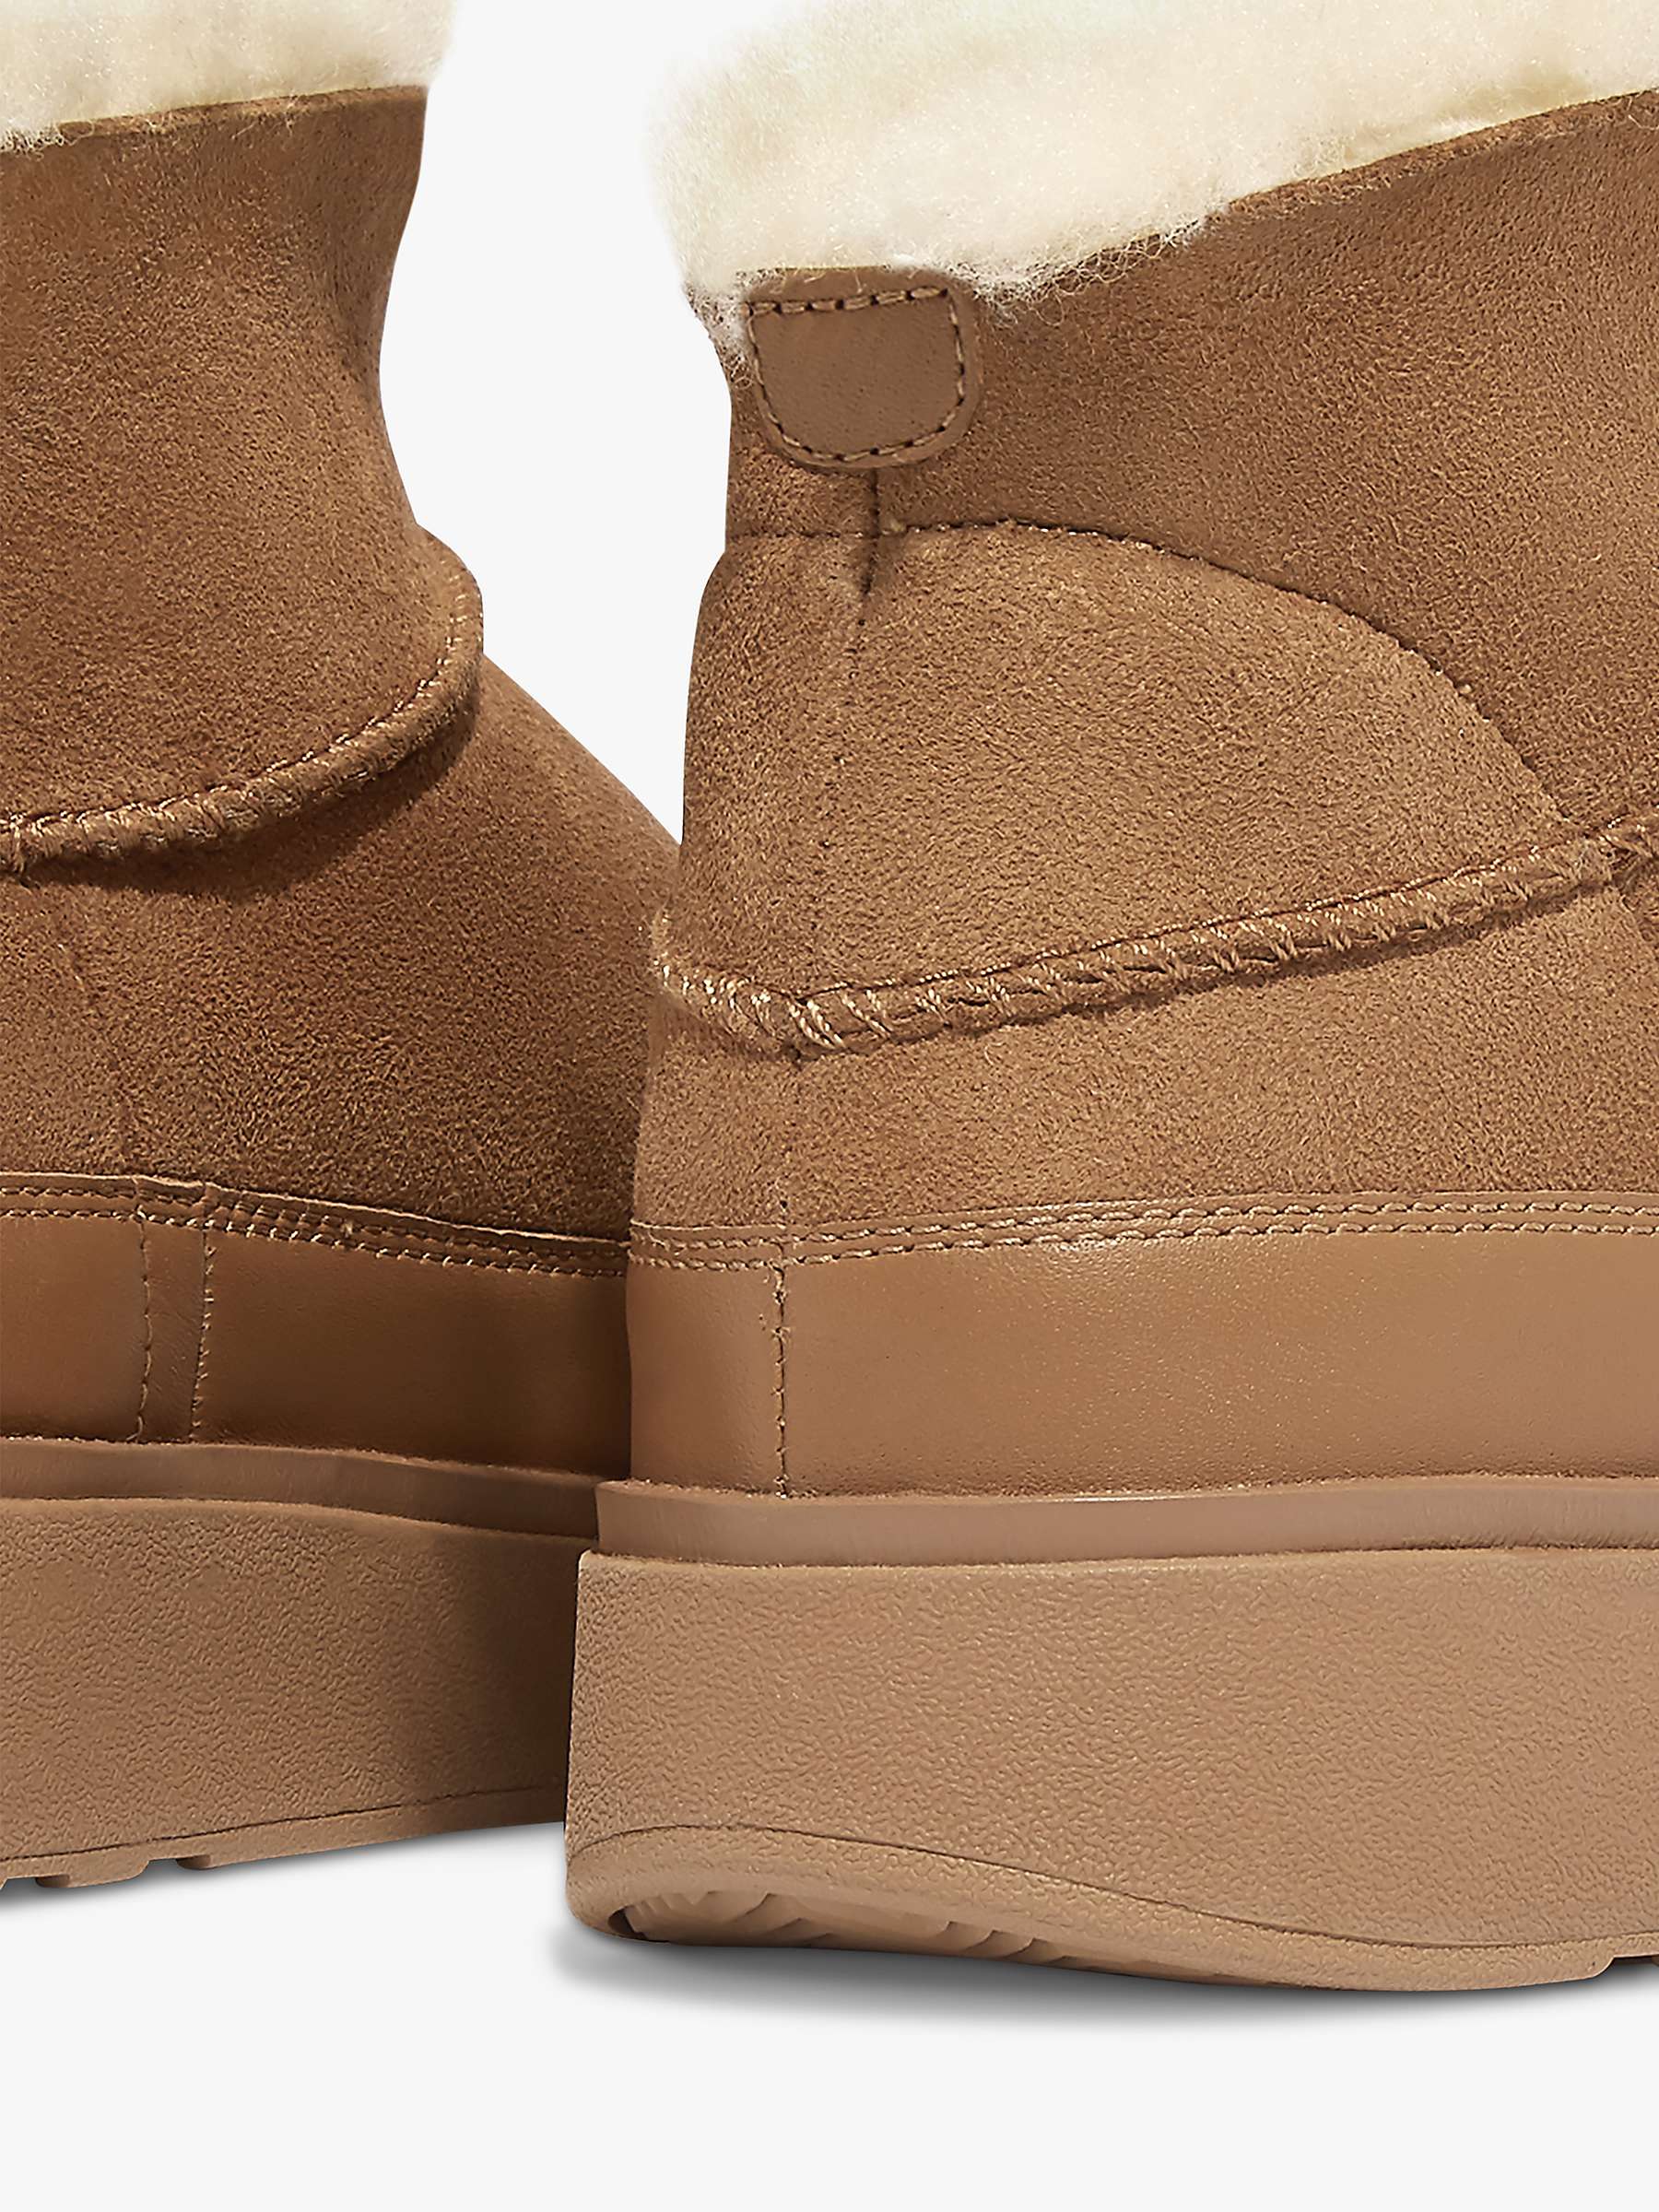 Buy FitFlop Gen FF Shearling Boots Online at johnlewis.com